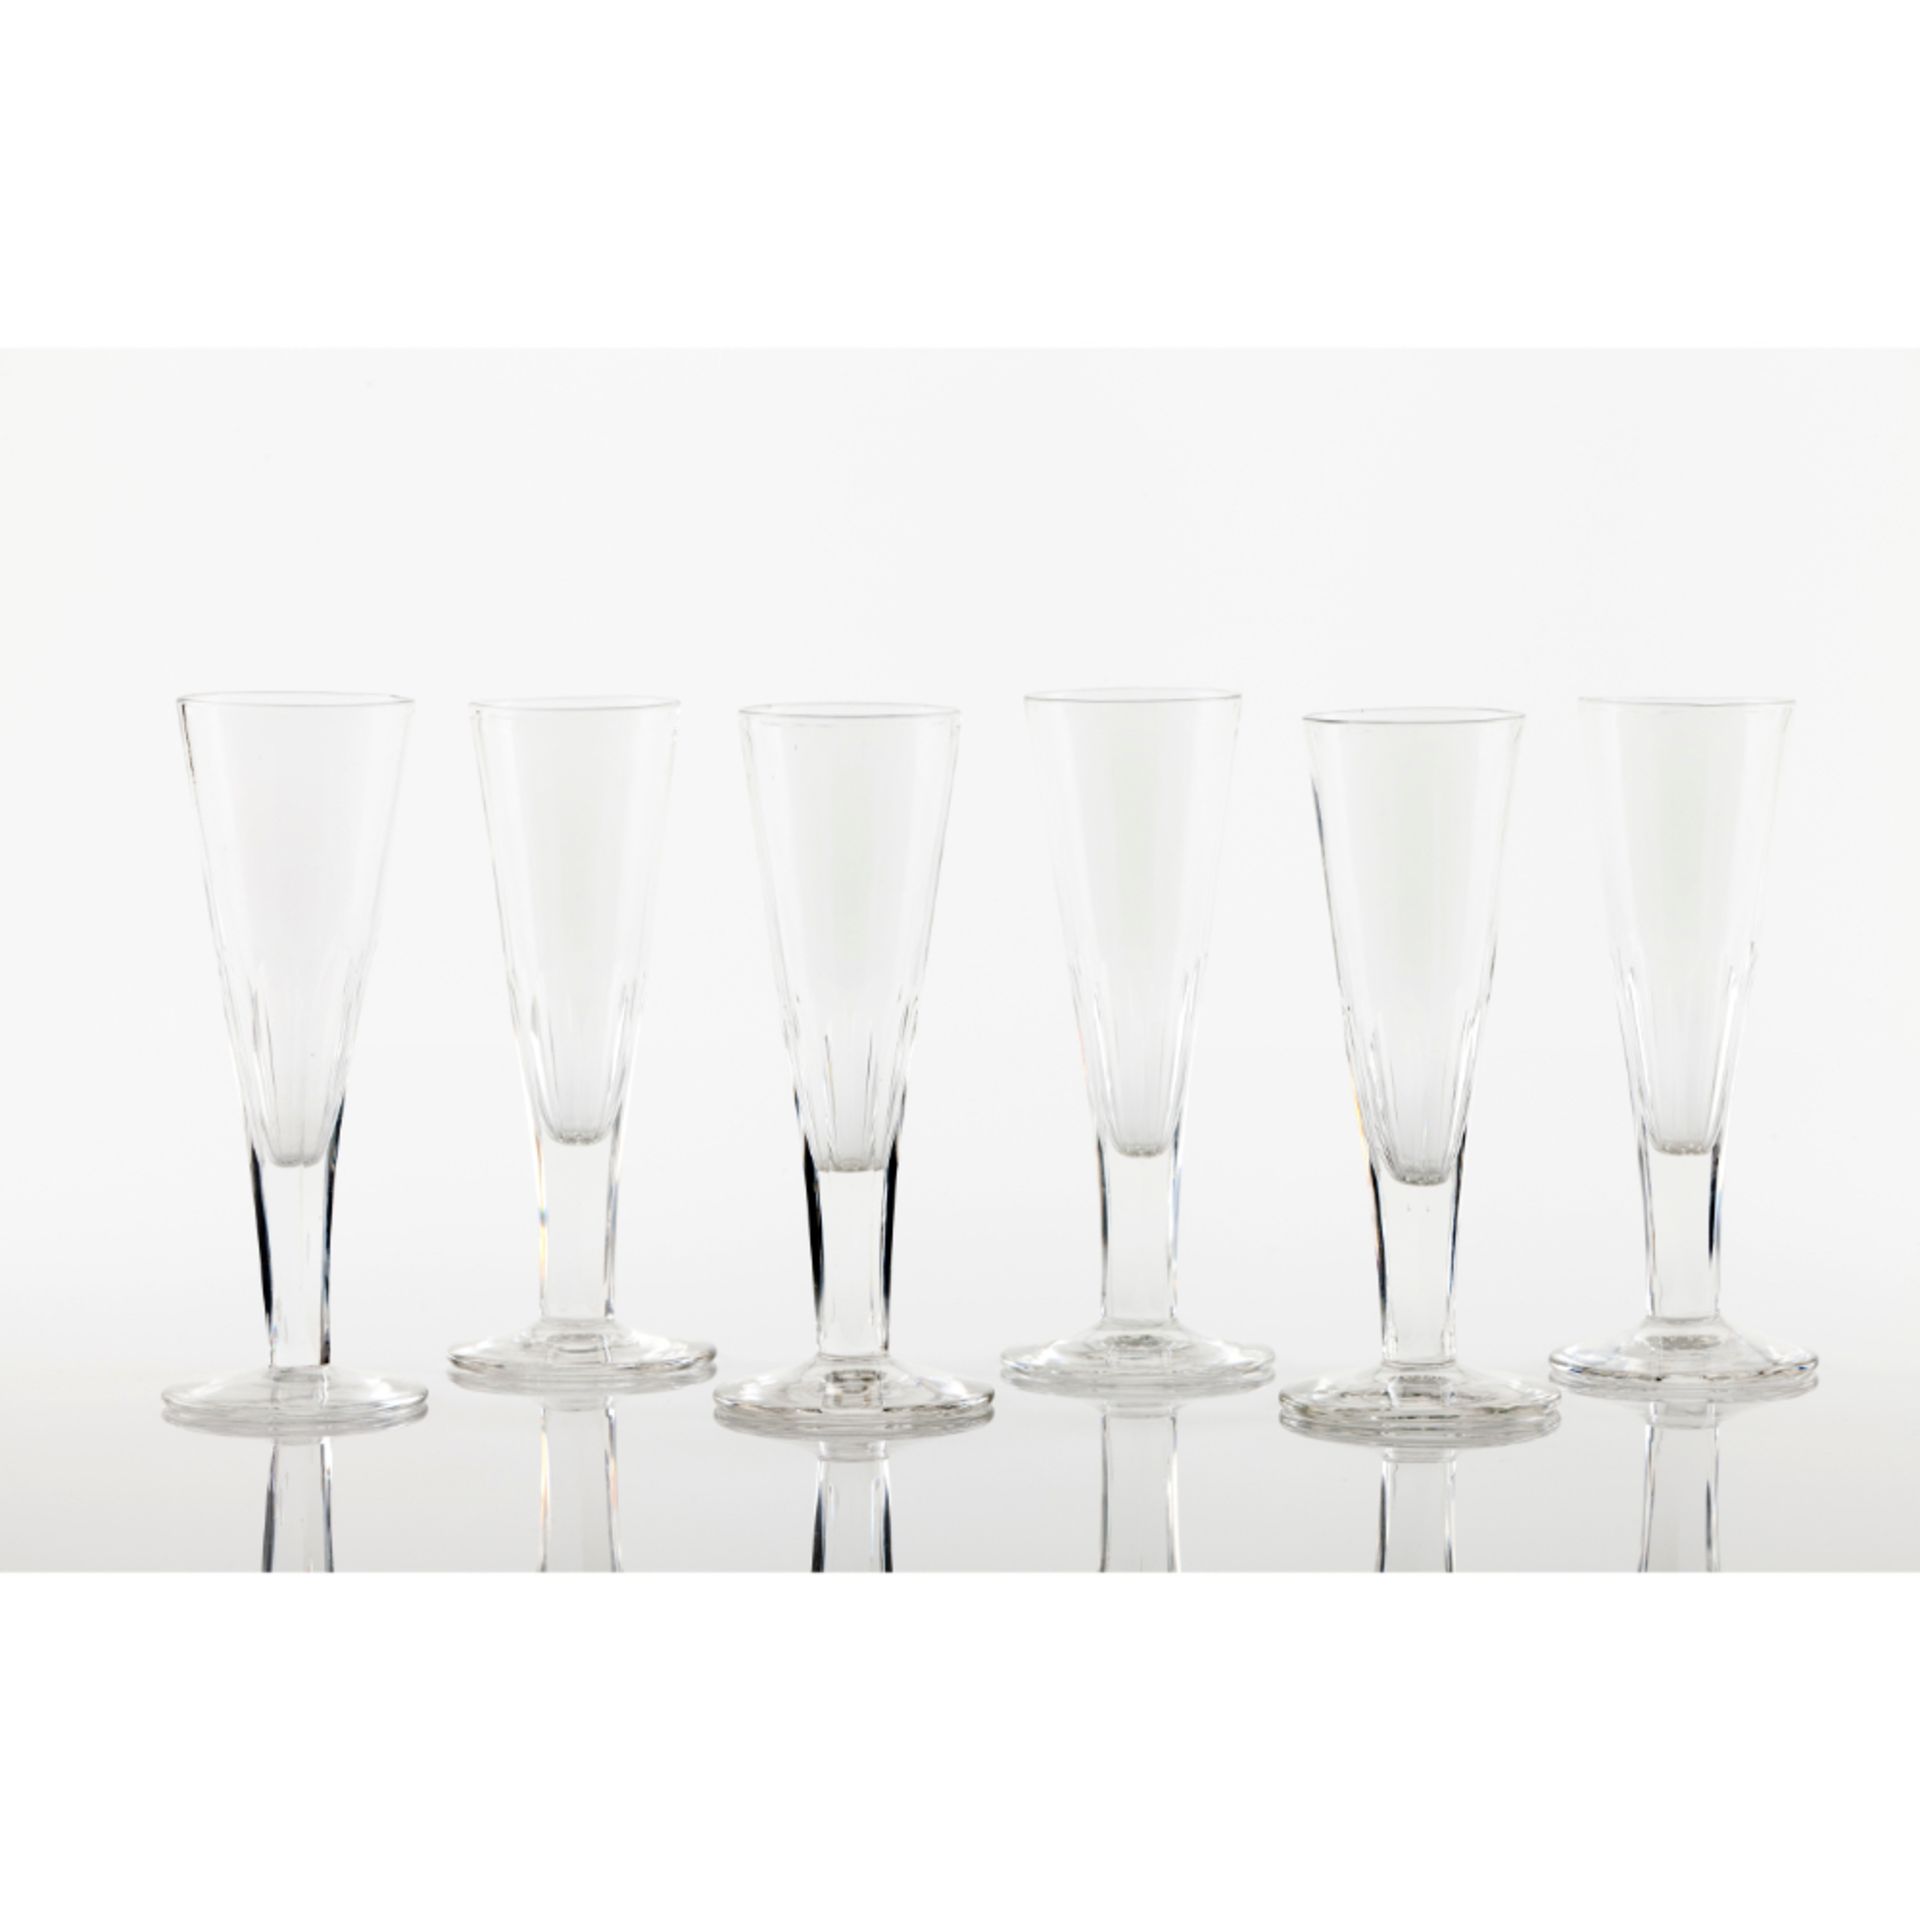 A set of 6 cut crystal champagne flutes